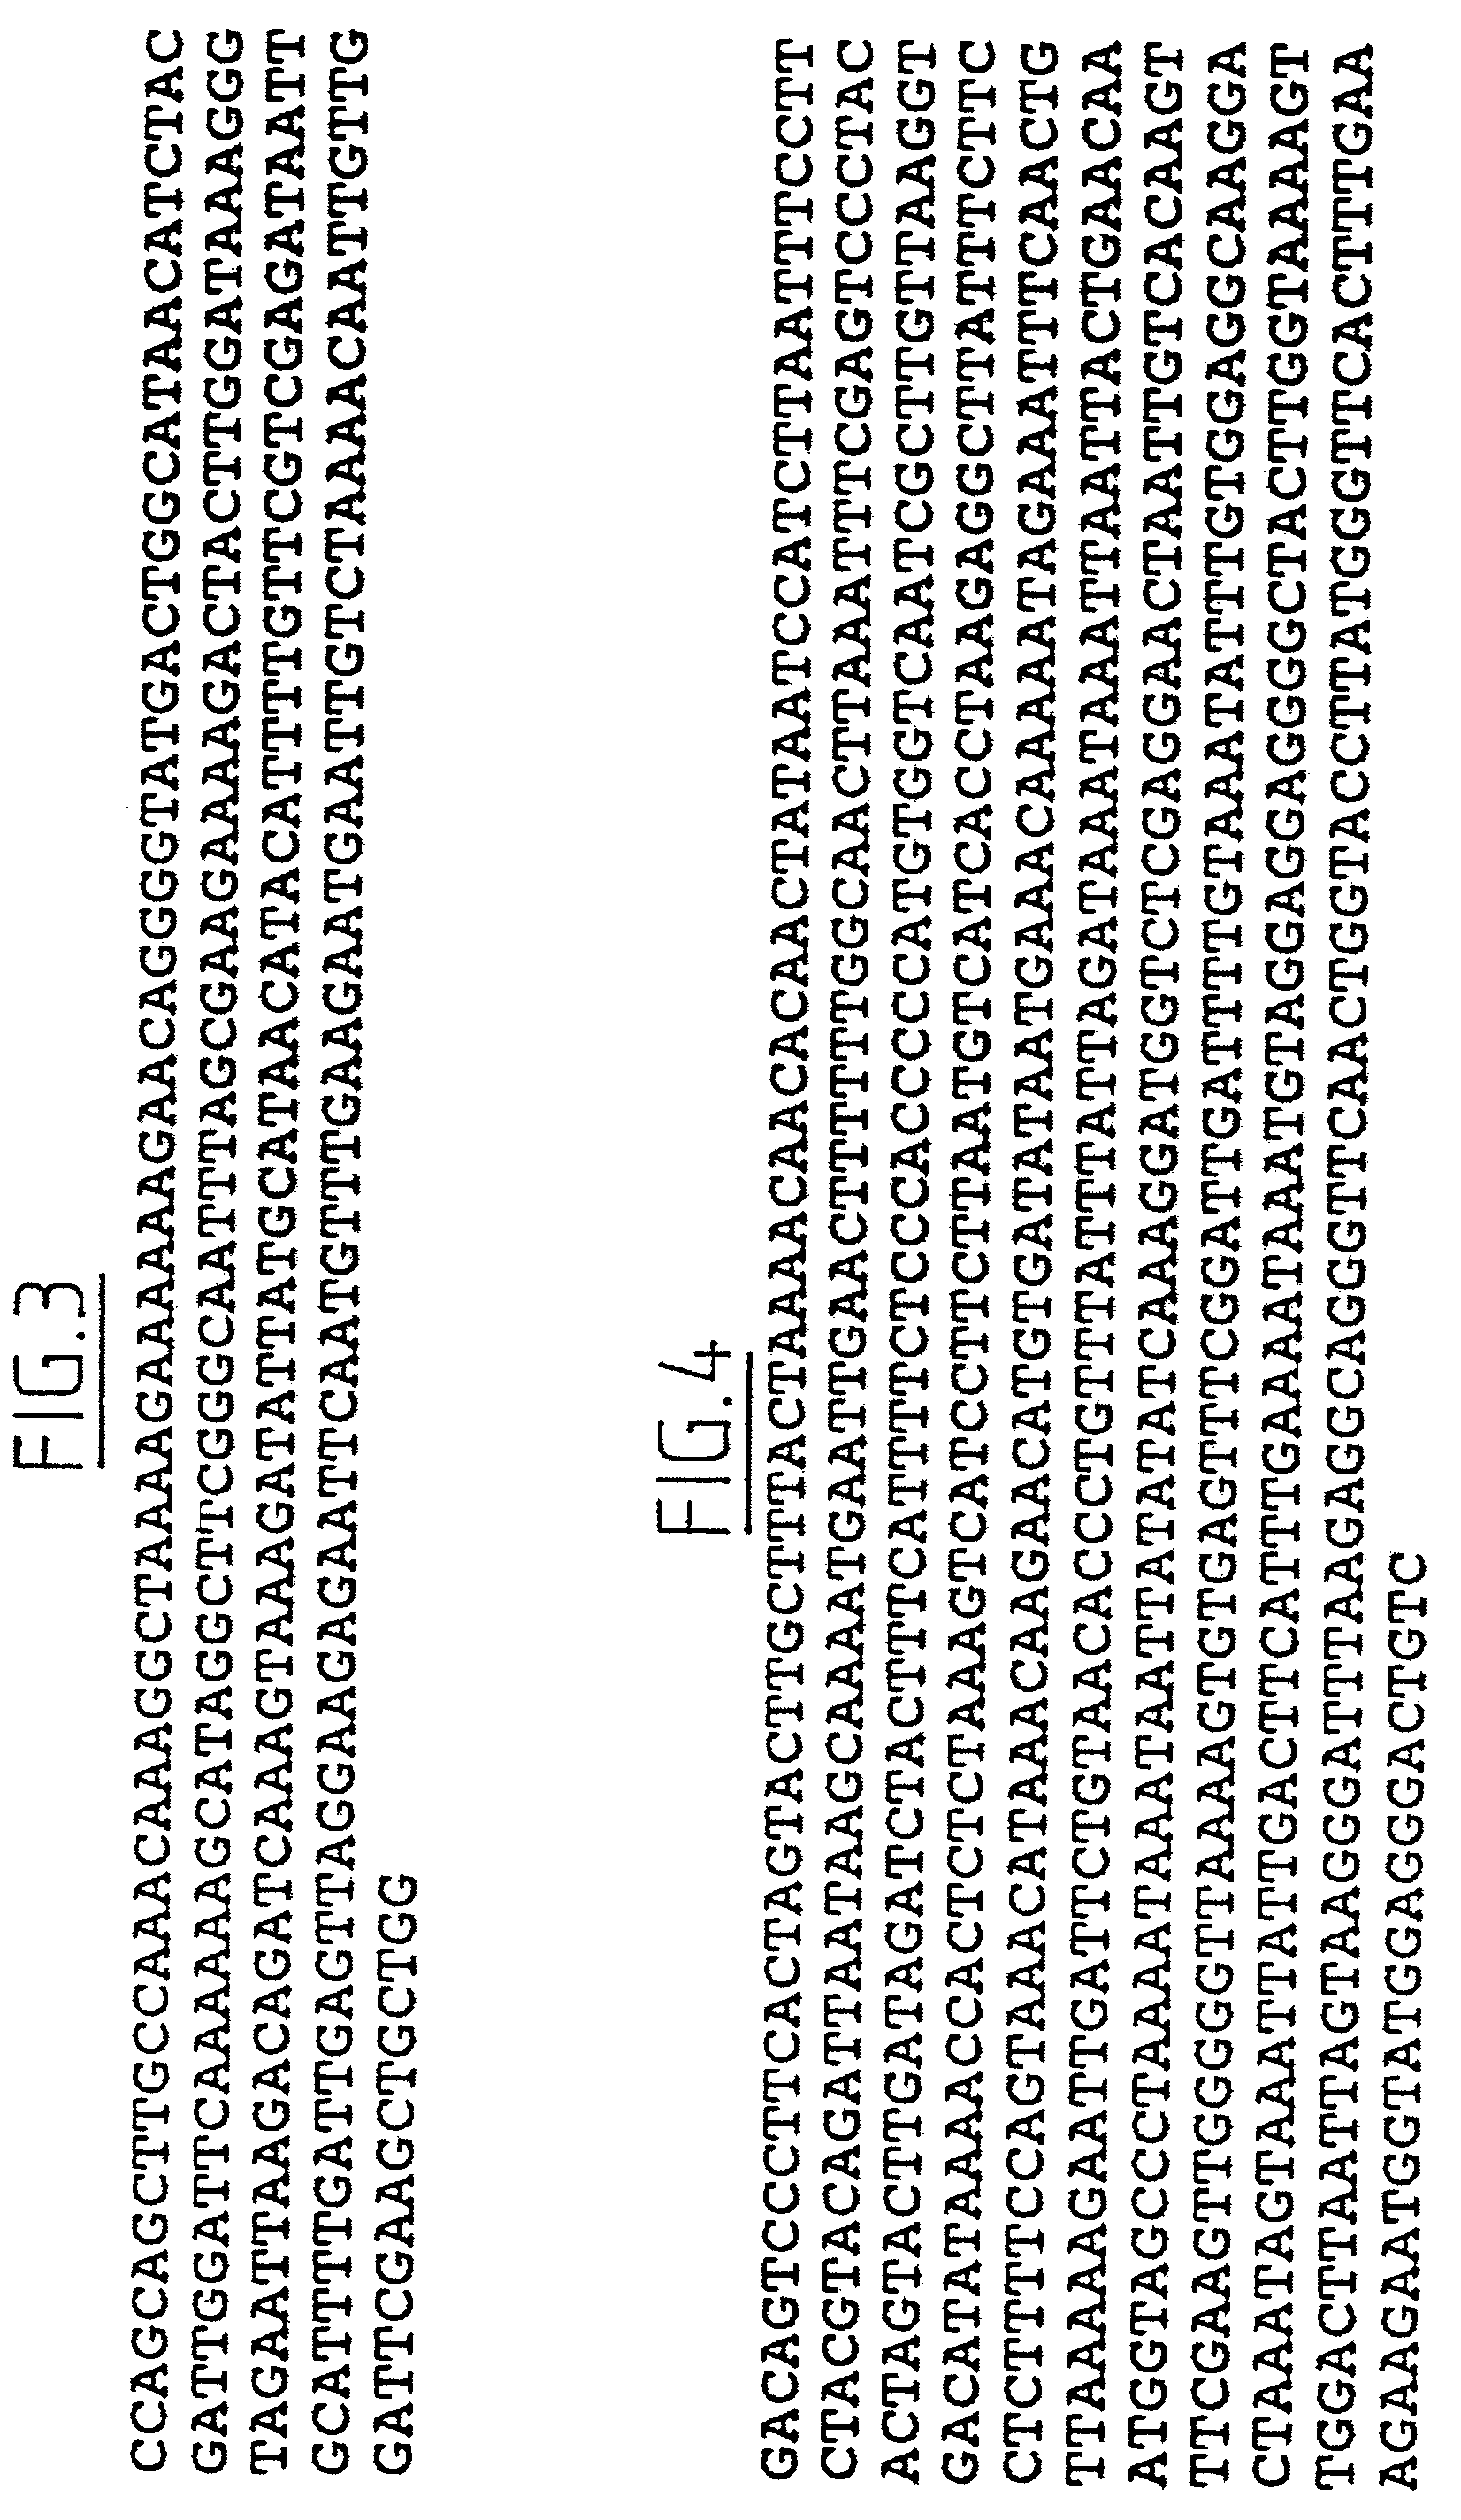 Method for obtaining a plant with a lasting resistance to a pathogen